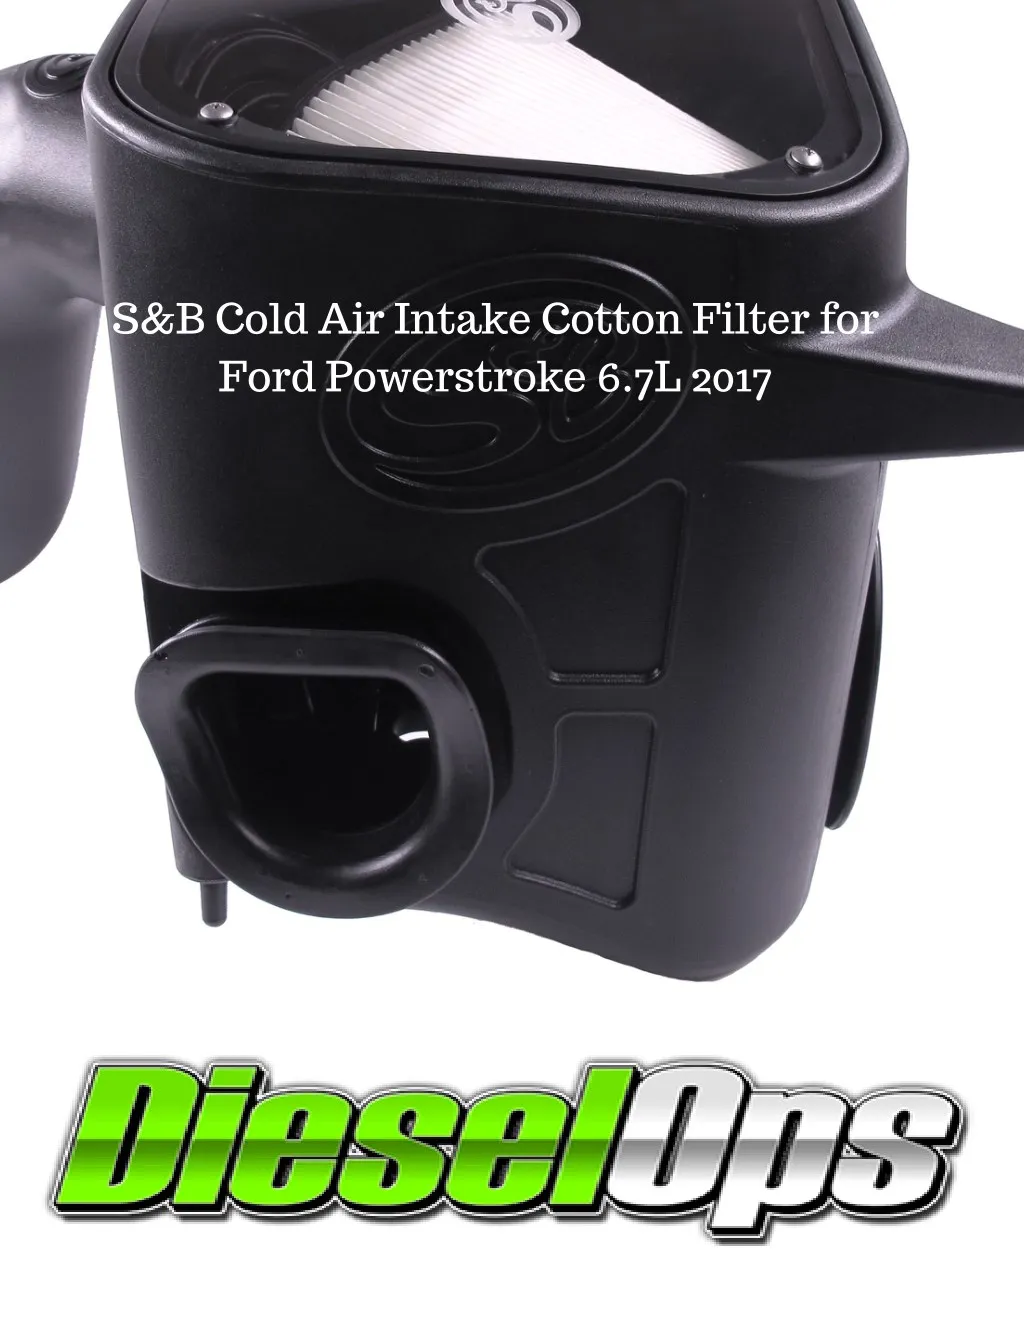 s b cold air intake cotton filter for ford